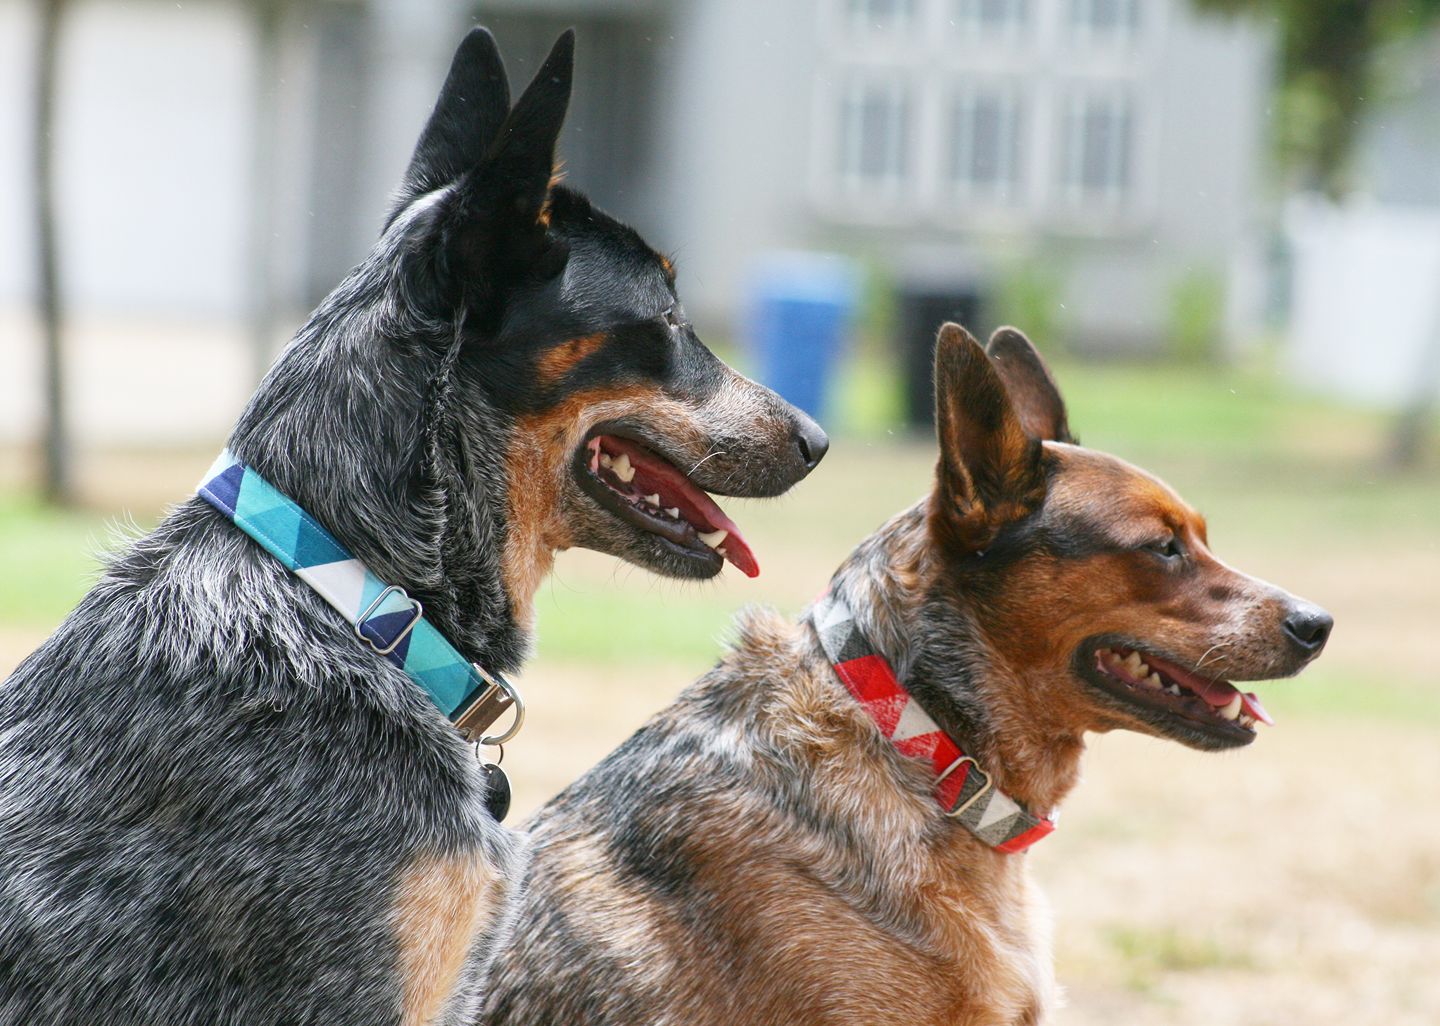 Two Australian Cattle Dogs wearing Kira's Pet Shop collars - both collars are a triangle geometric pattern, one in white and one in red. Photo by @enzo.and.the.pack